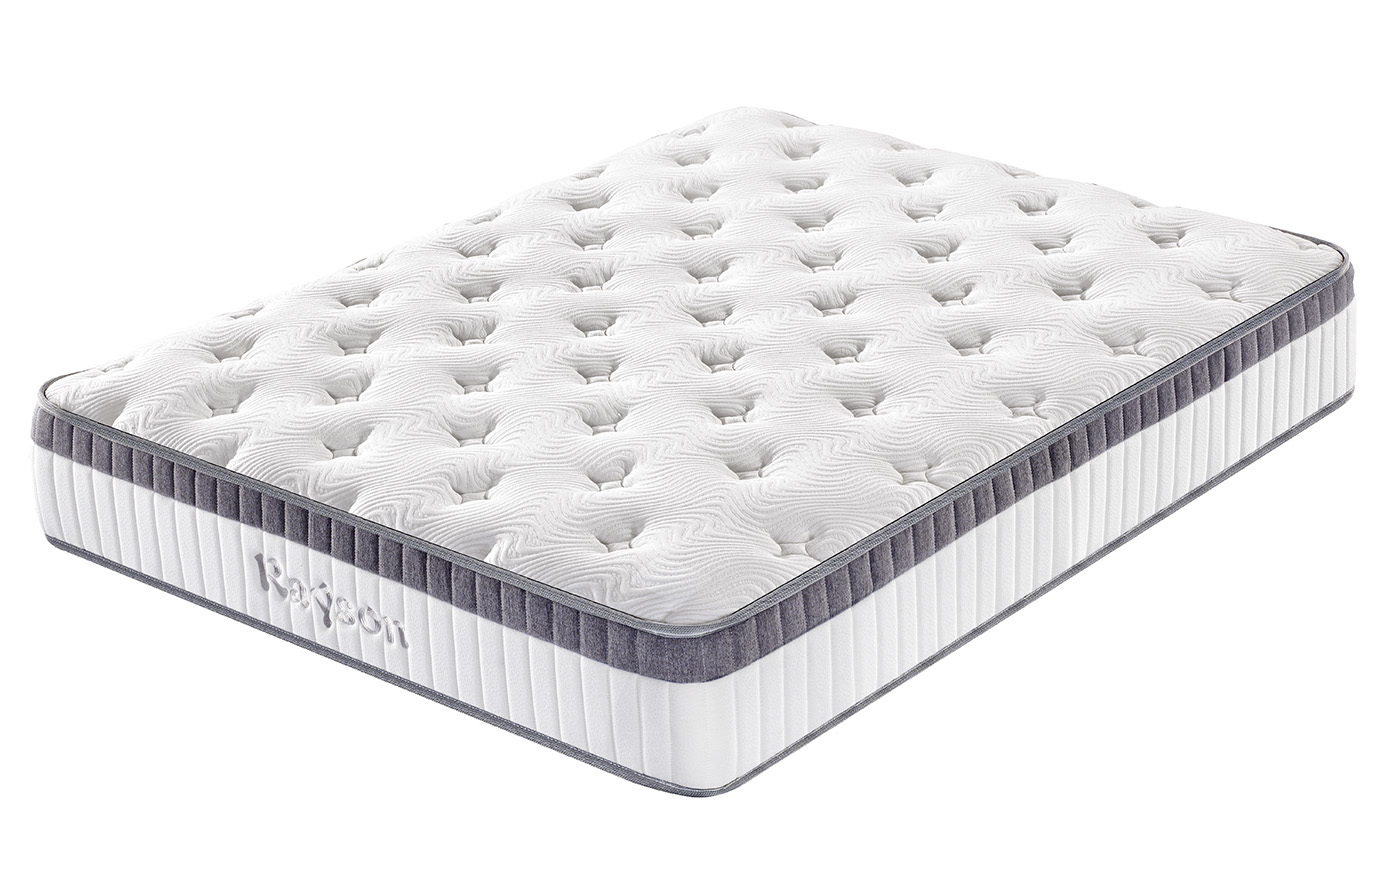 Hot euro pocket spring mattress back rsp2s Synwin Brand